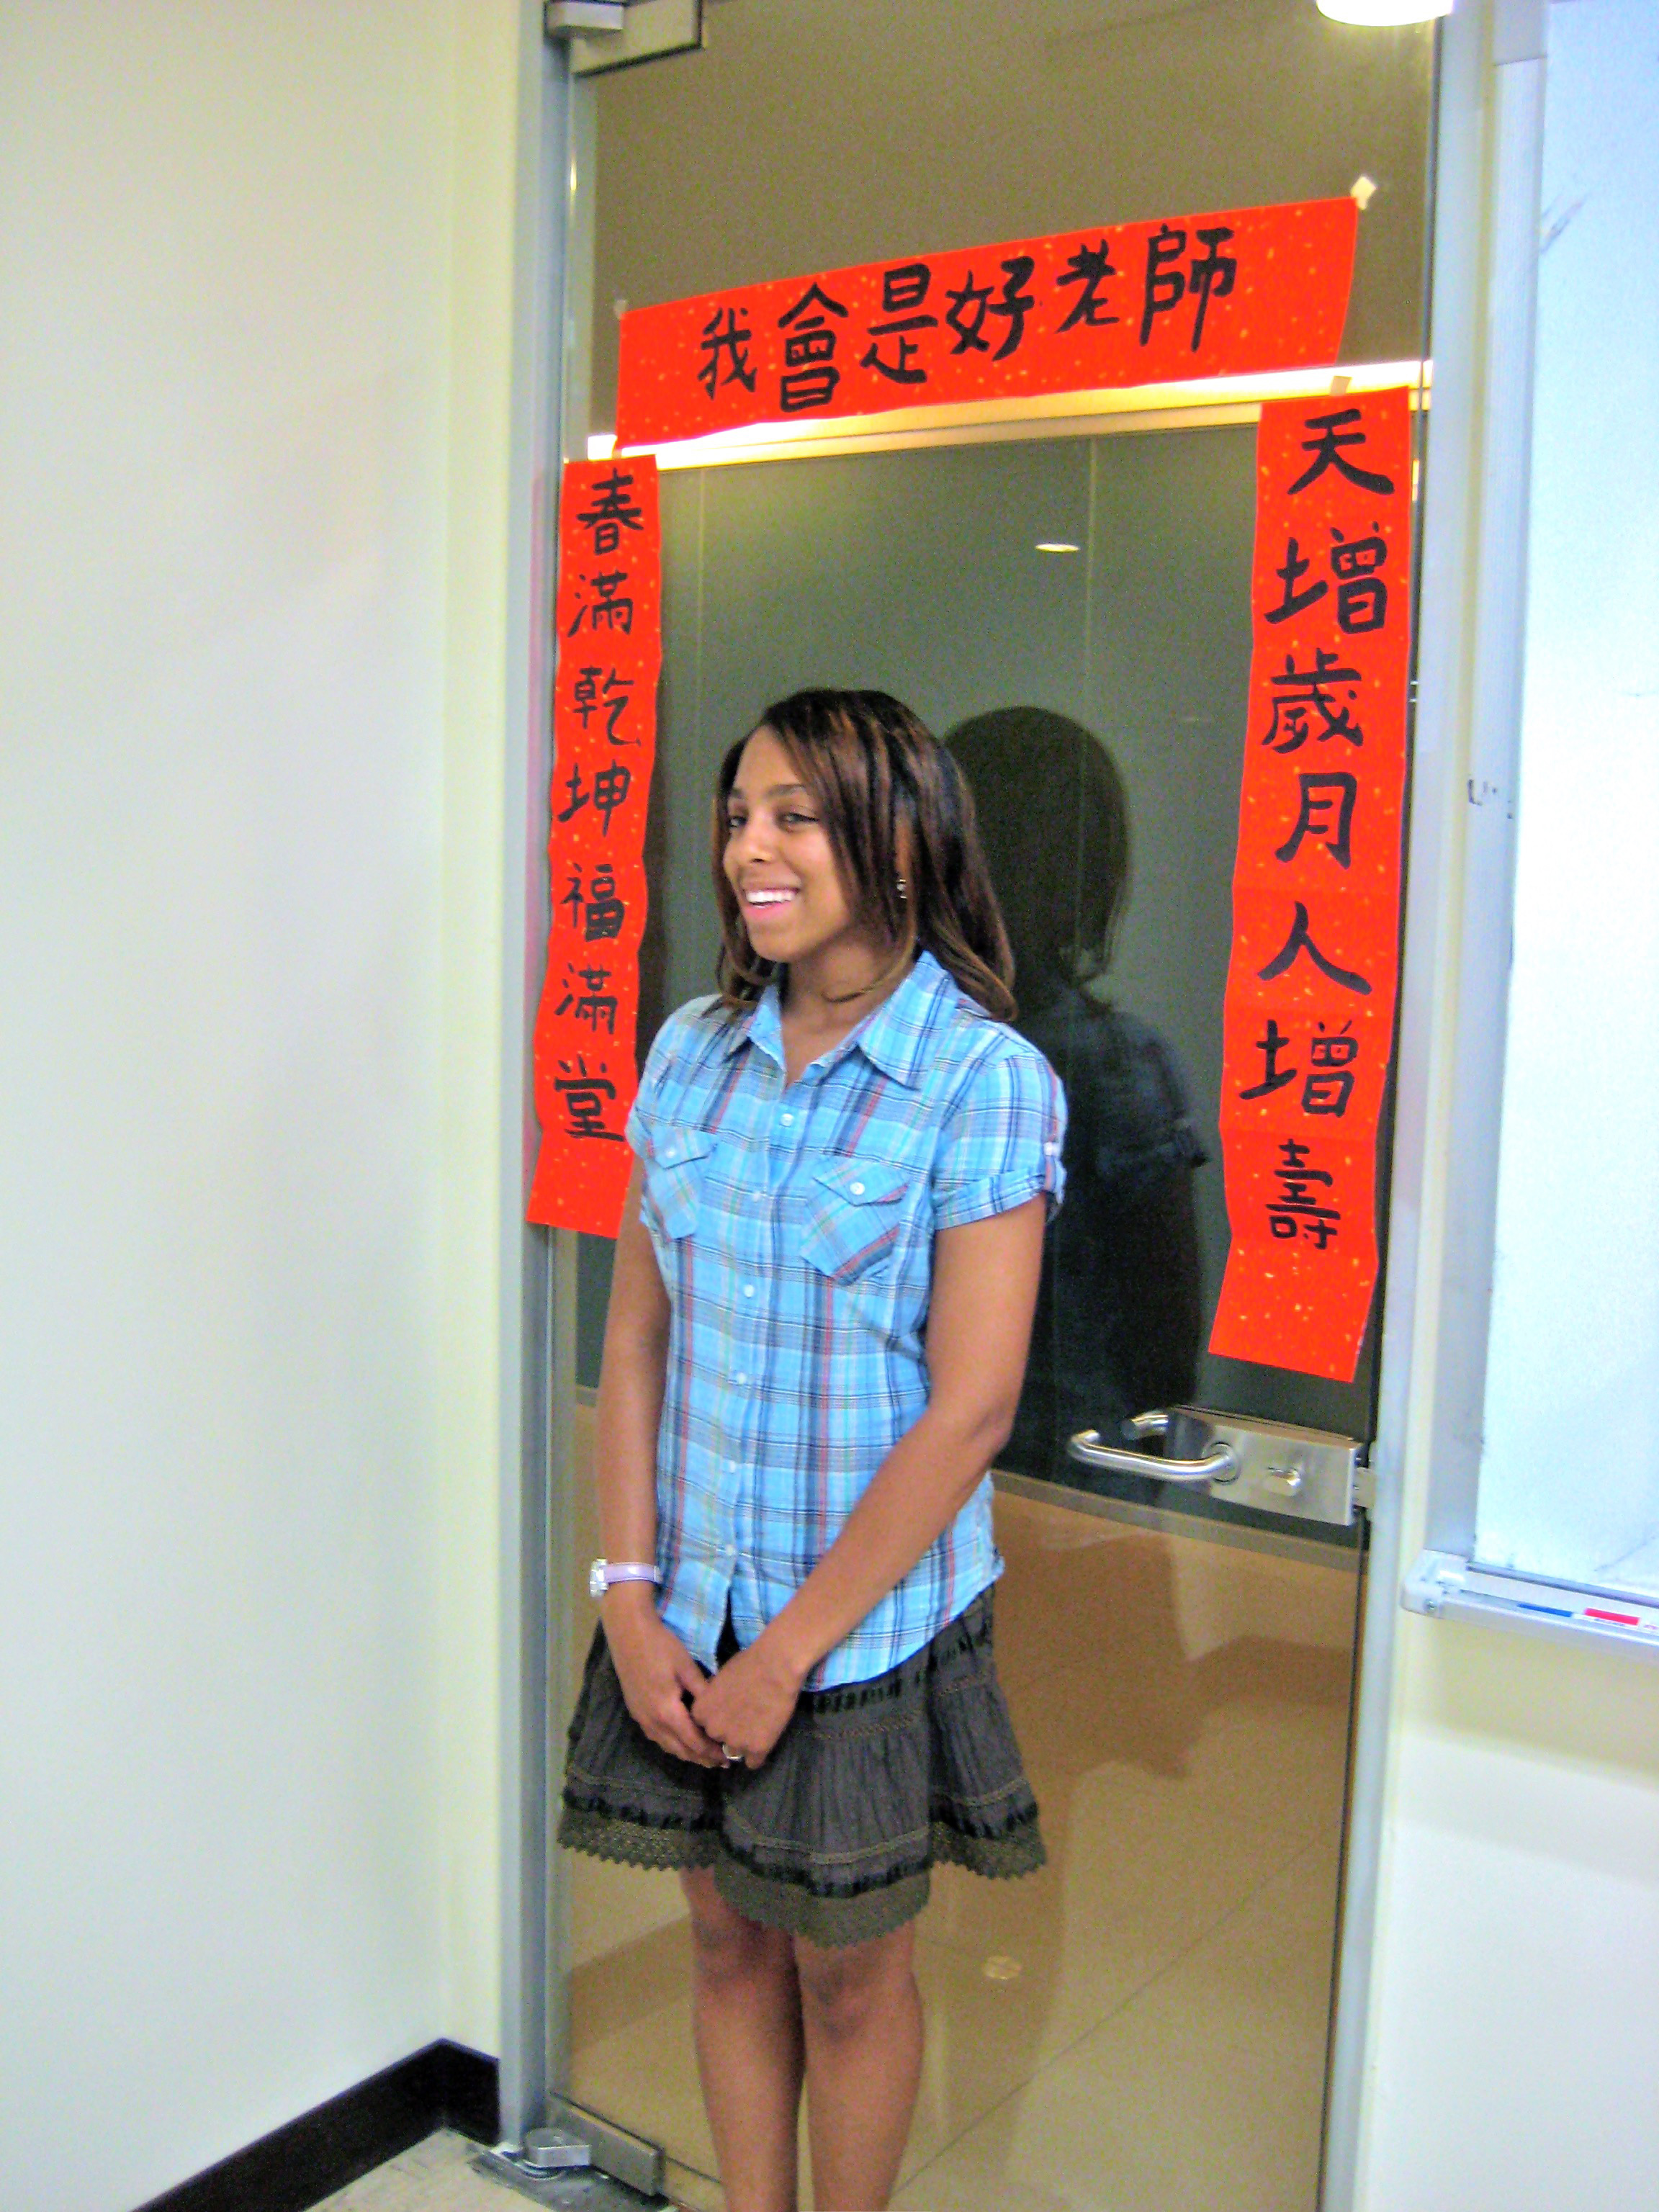 Krystal Booker-Reusch having her picture taken in front of Taiwanese text